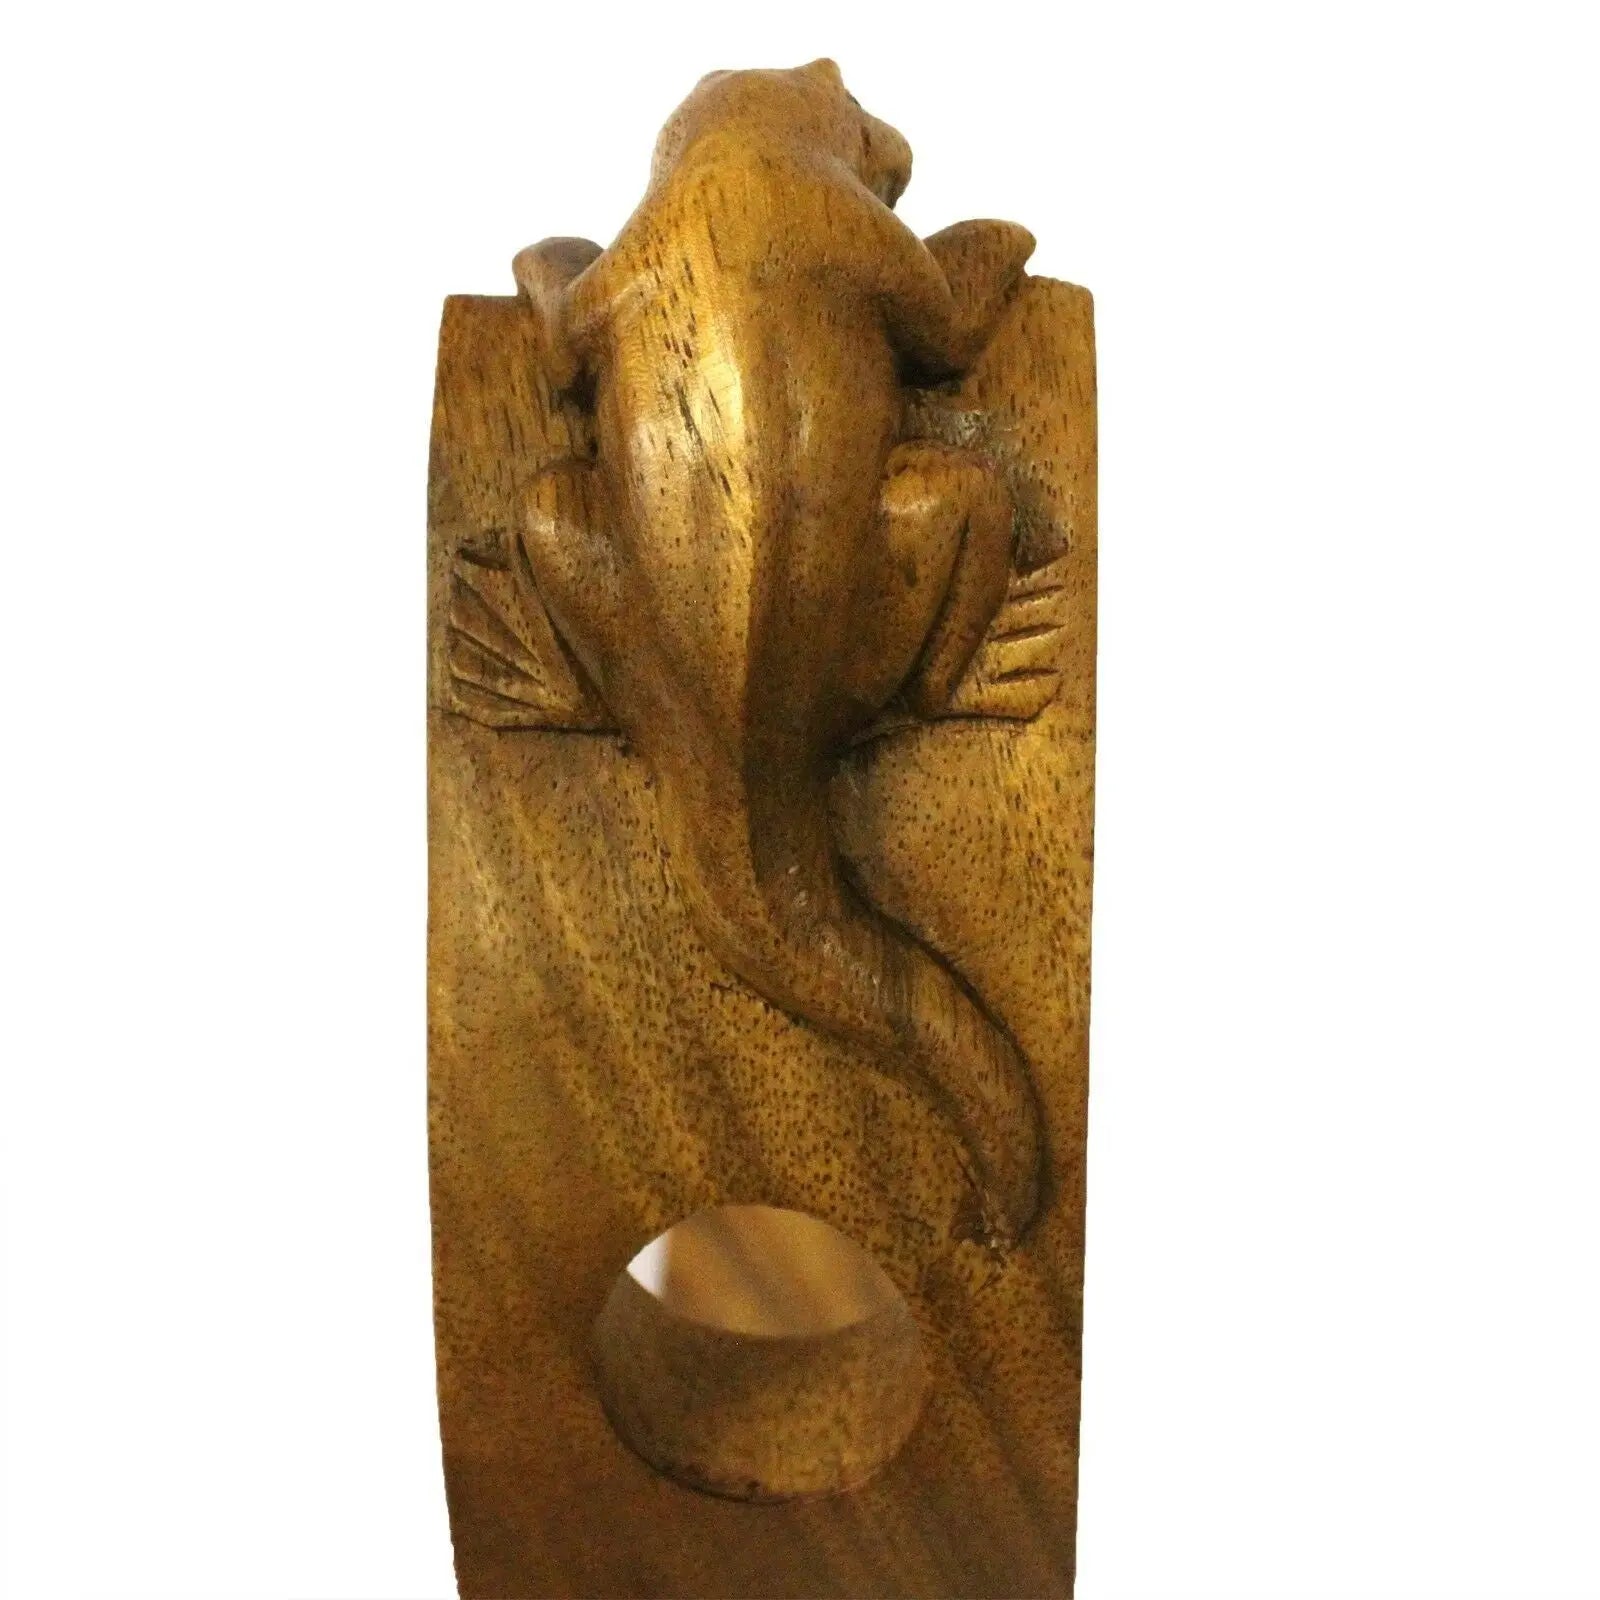 Suar Wood Balance hand-carved Wine Holders-turtle-PERFECT GIFT/decorative item Unbranded